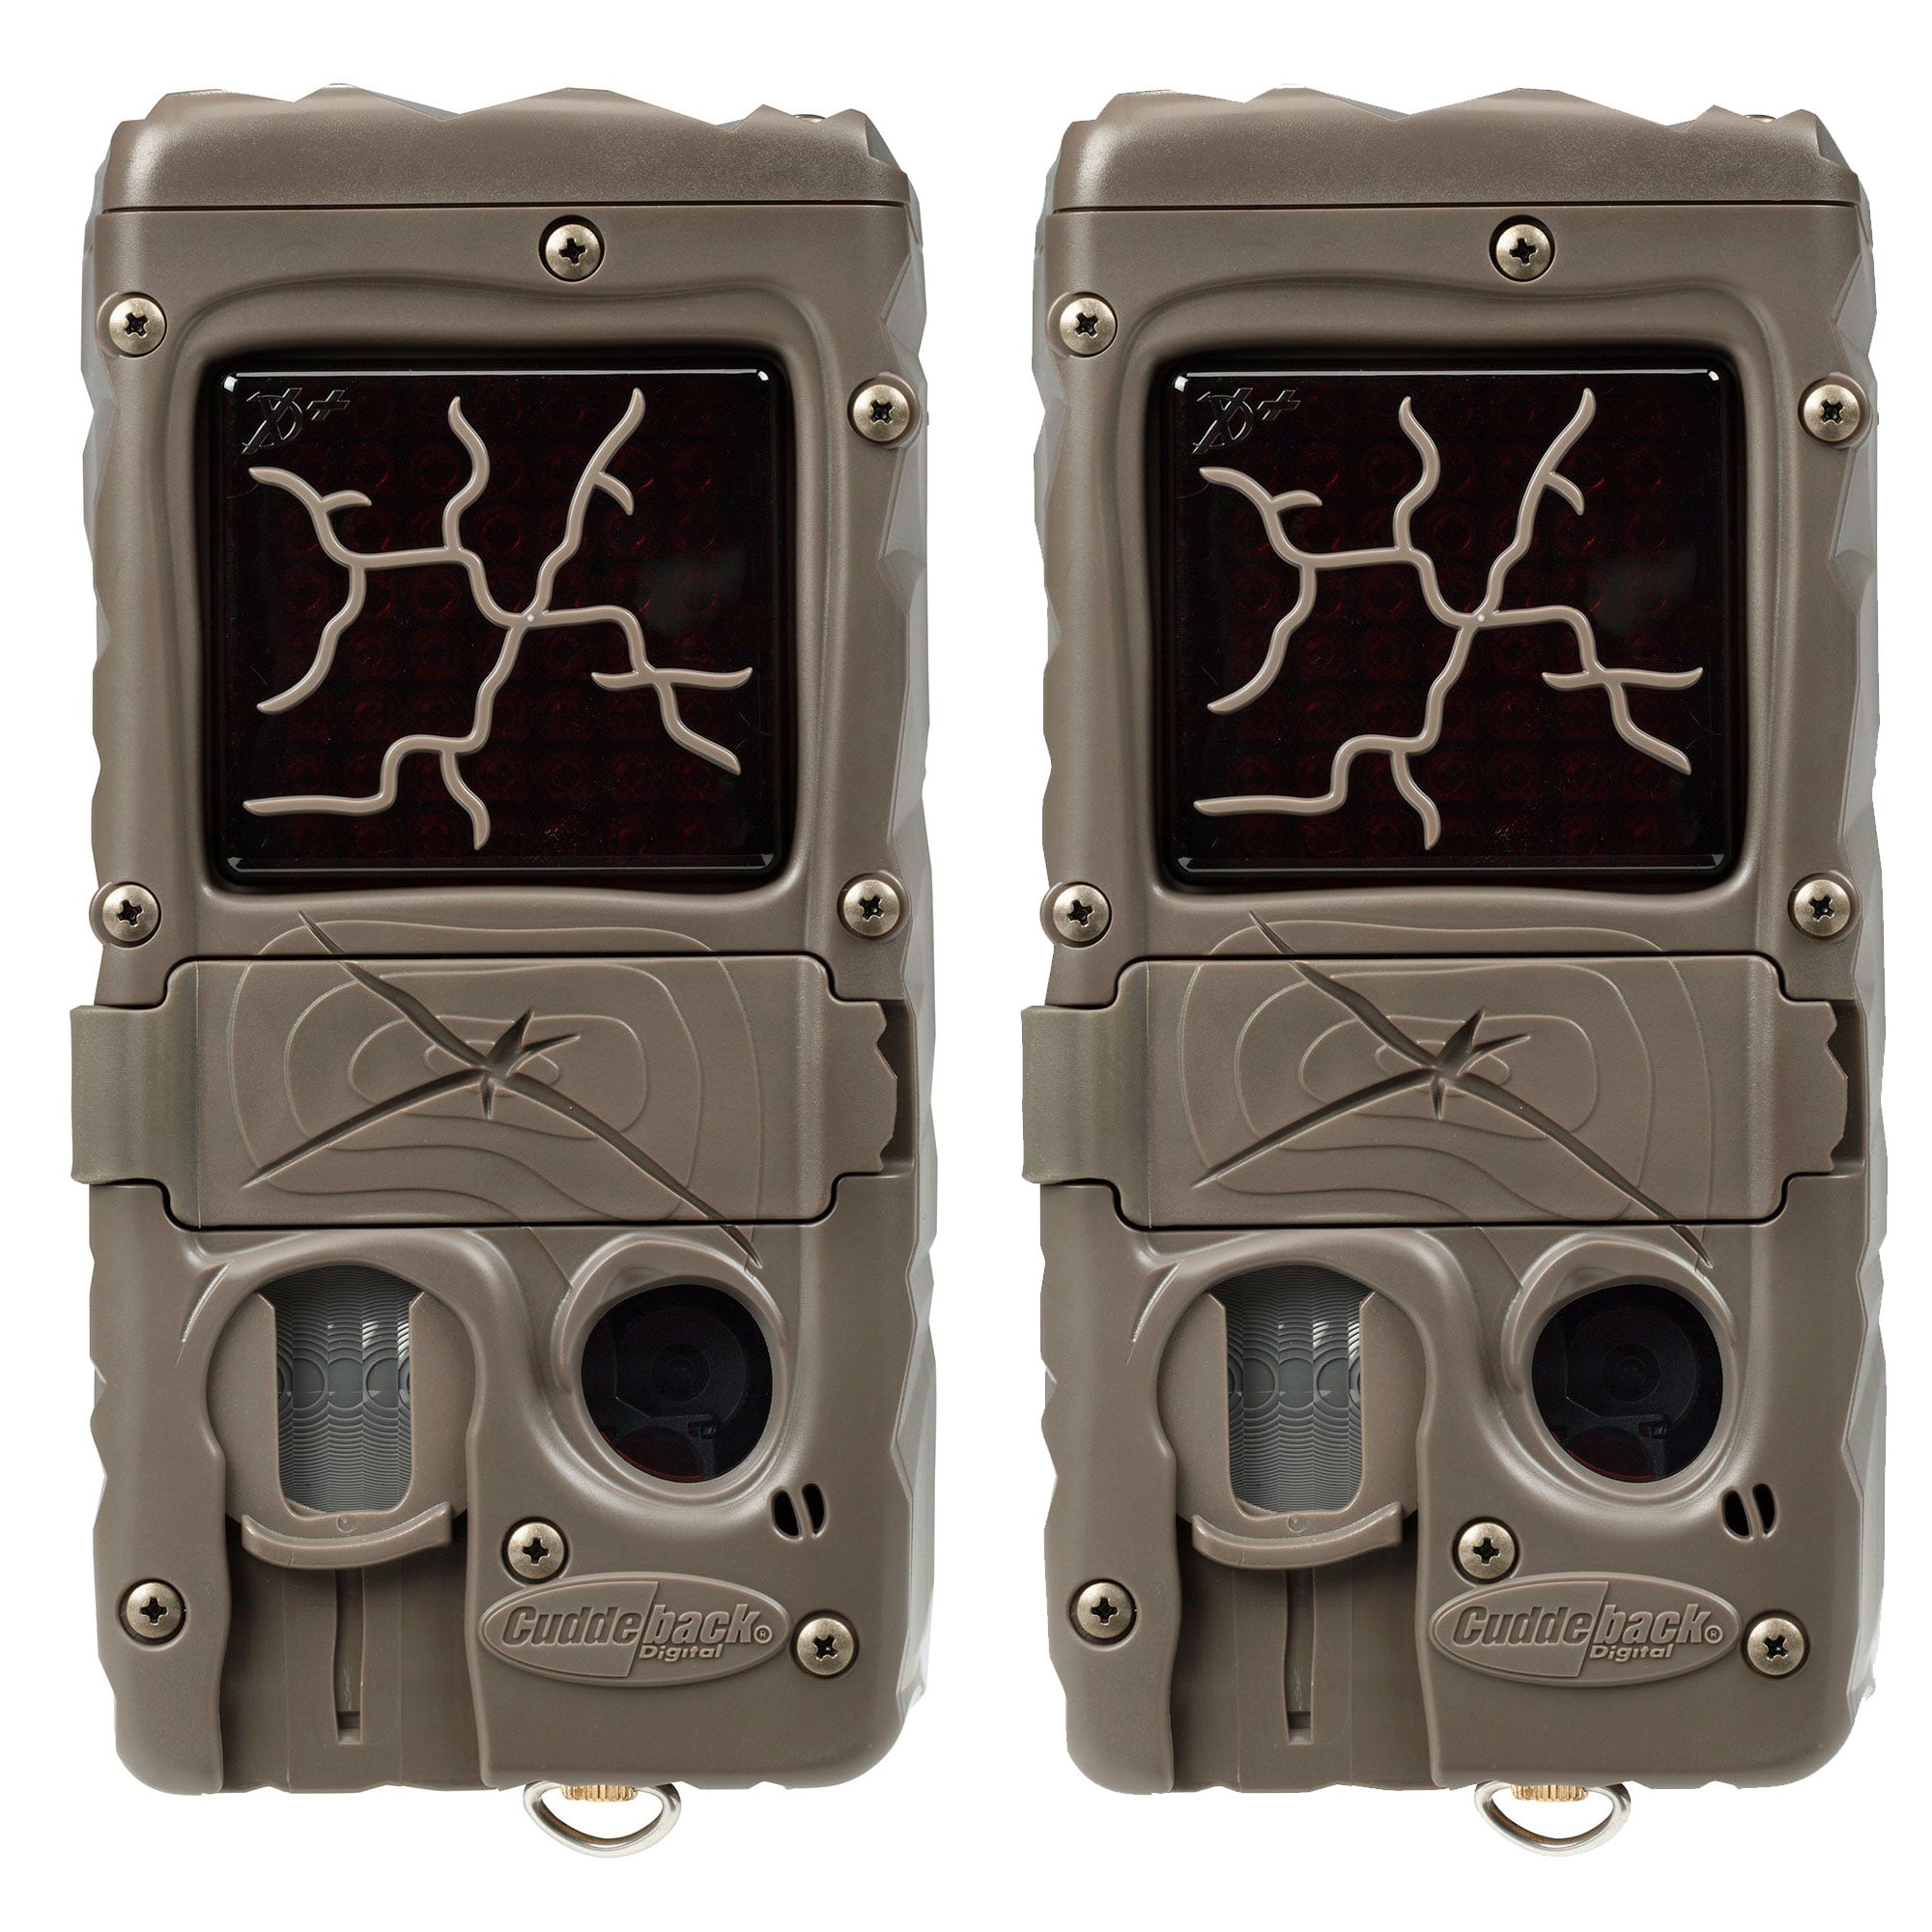 Cuddeback Dual Flash Cuddelink Invisible Infrared Game Trail Camera Security Box 